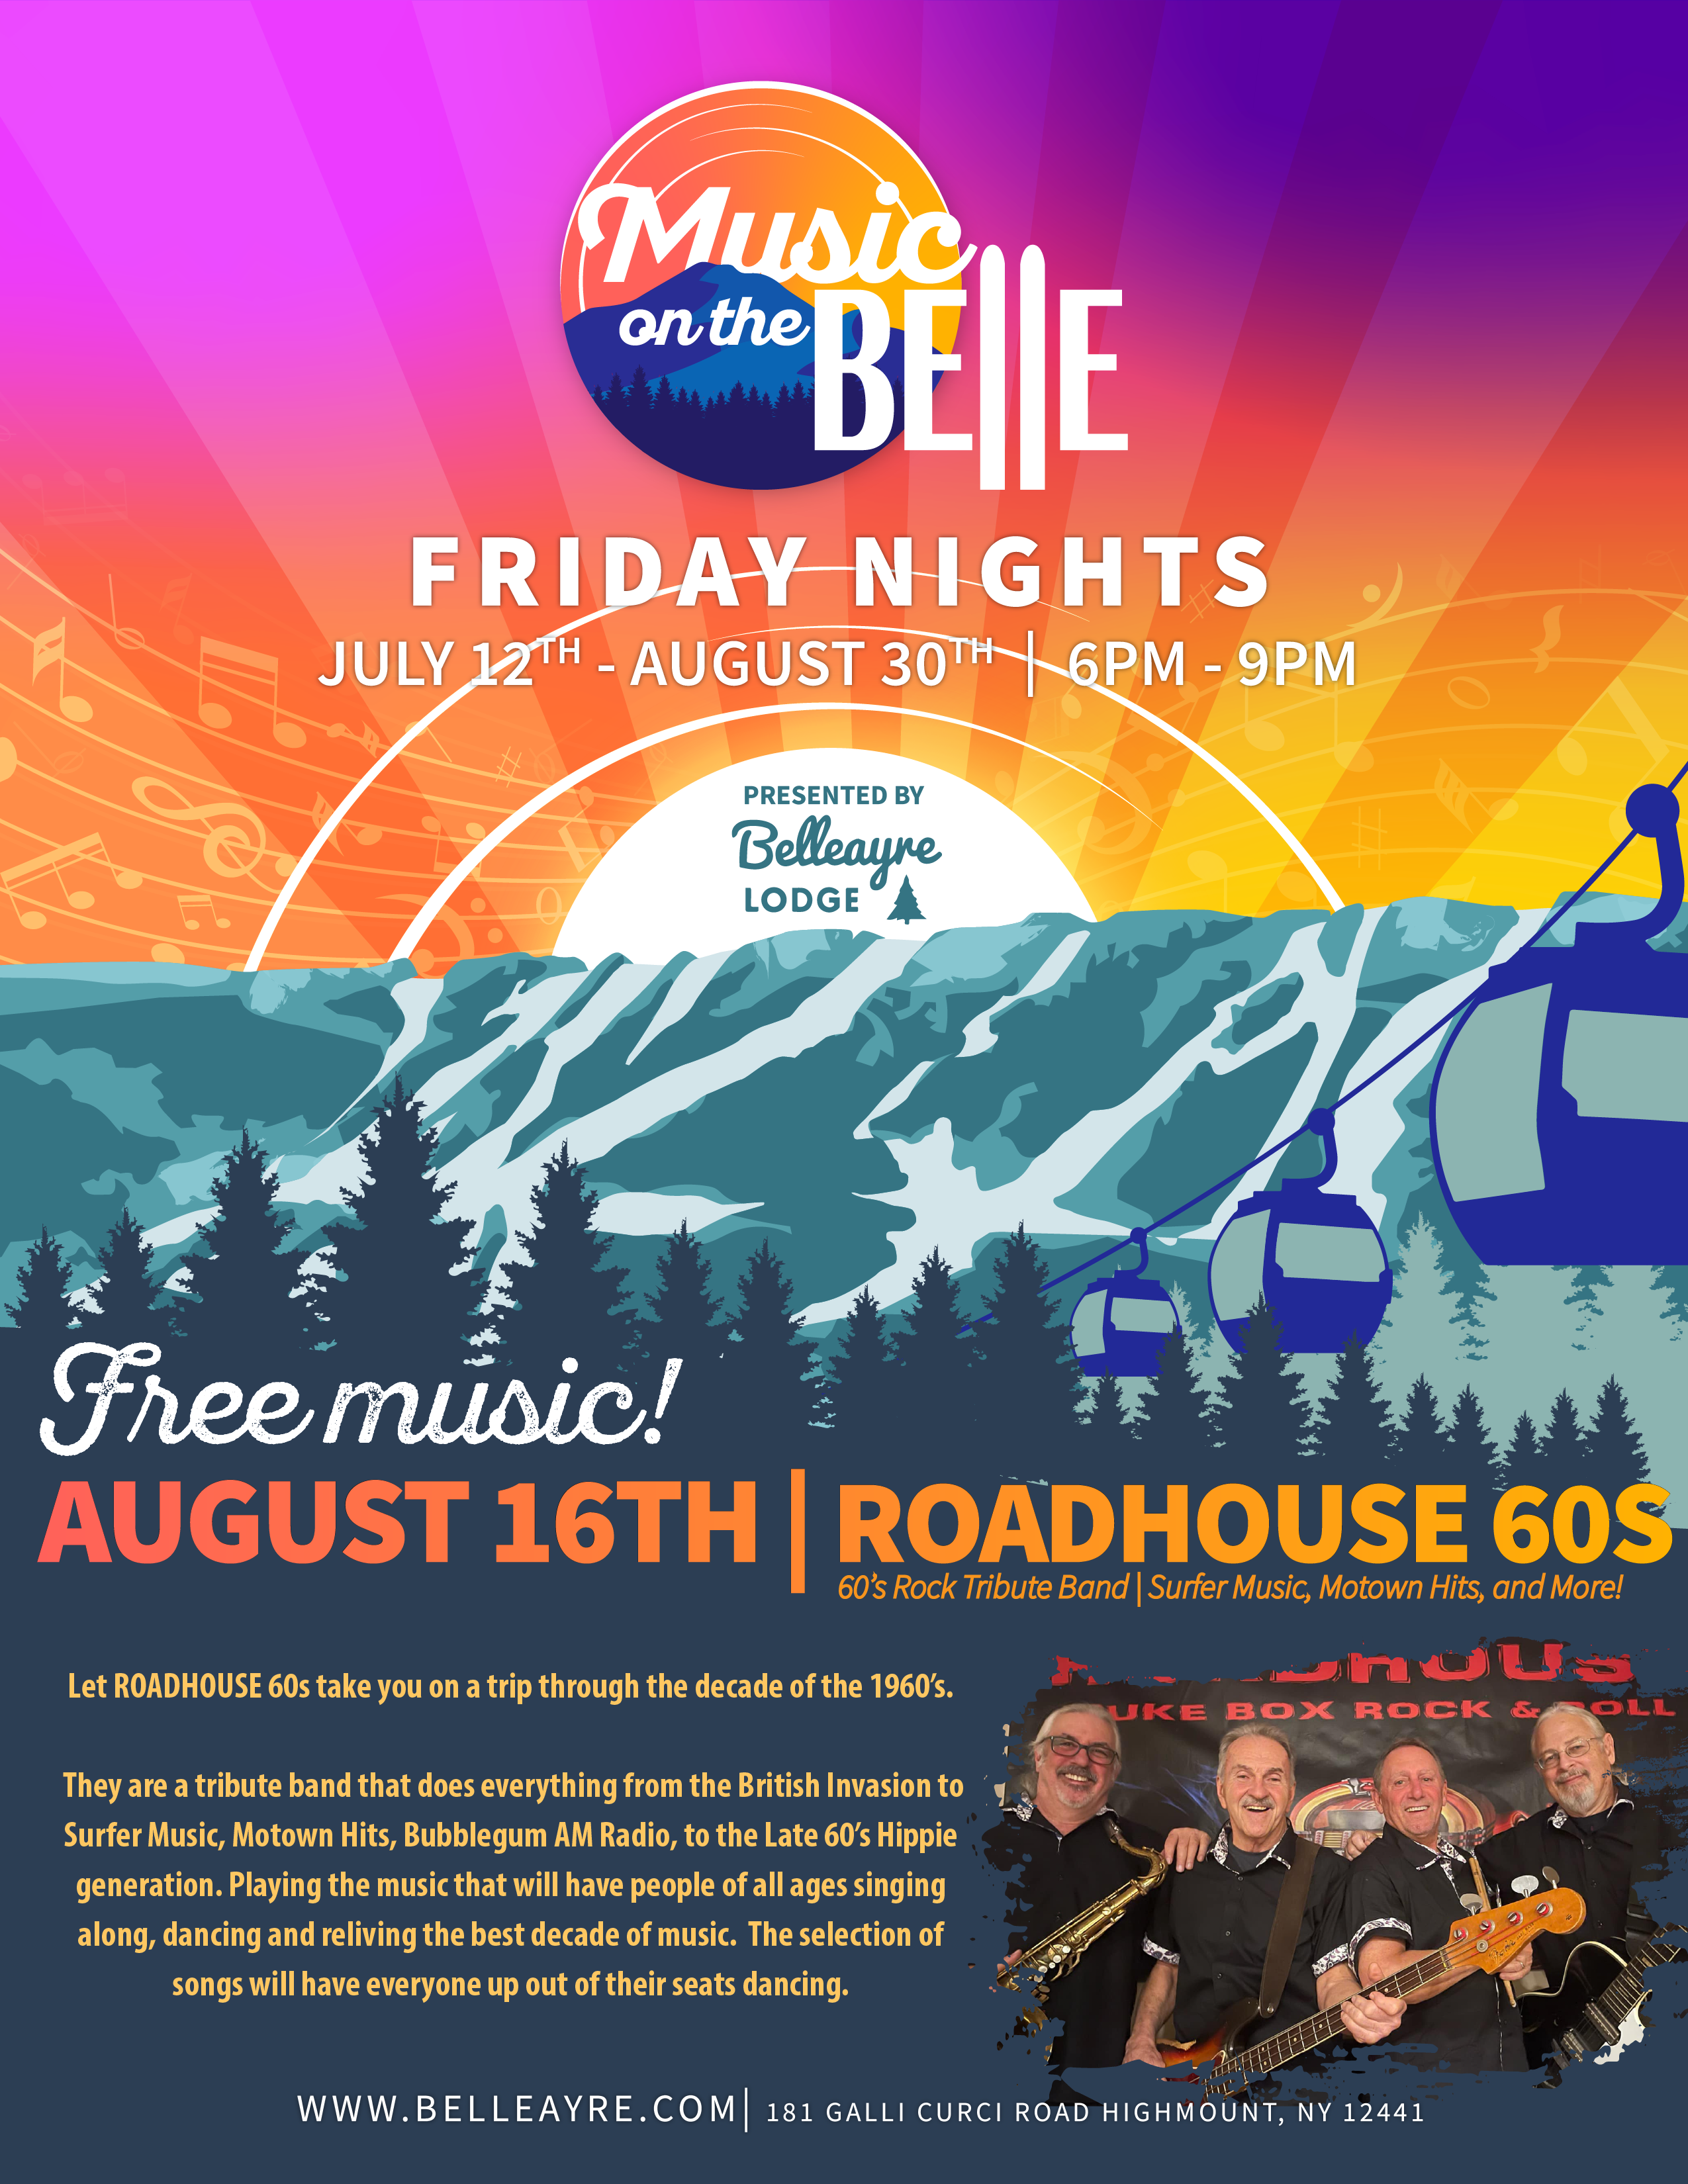 Roadhouse 60s Music on the Belle Friday nights flyer August 16th